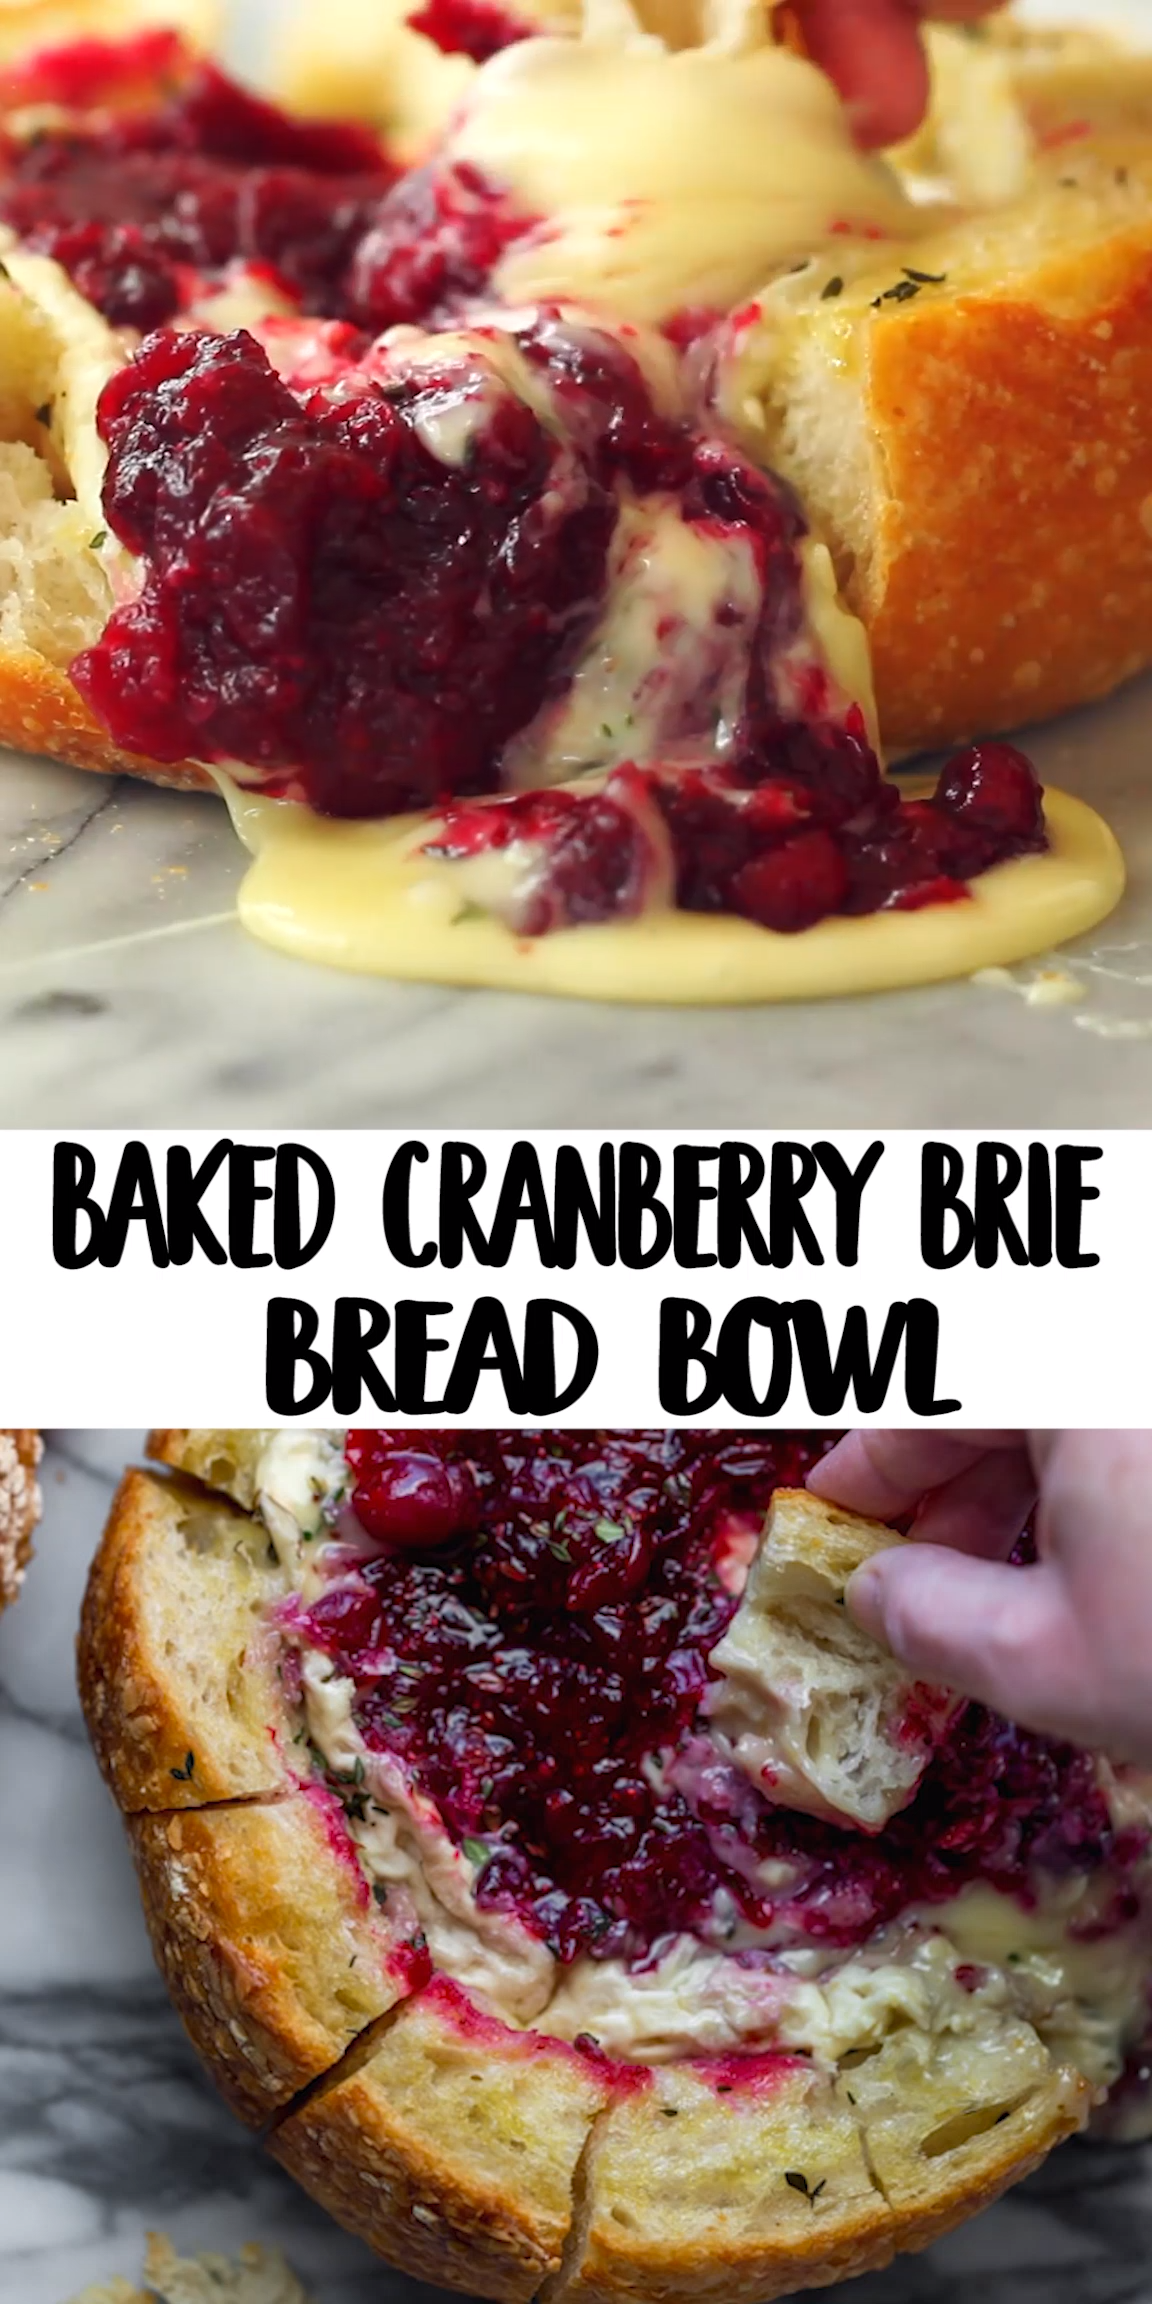 BAKED CRANBERRY BRIE BREAD BOWL - BAKED CRANBERRY BRIE BREAD BOWL -   18 thanksgiving appetizers easy ideas